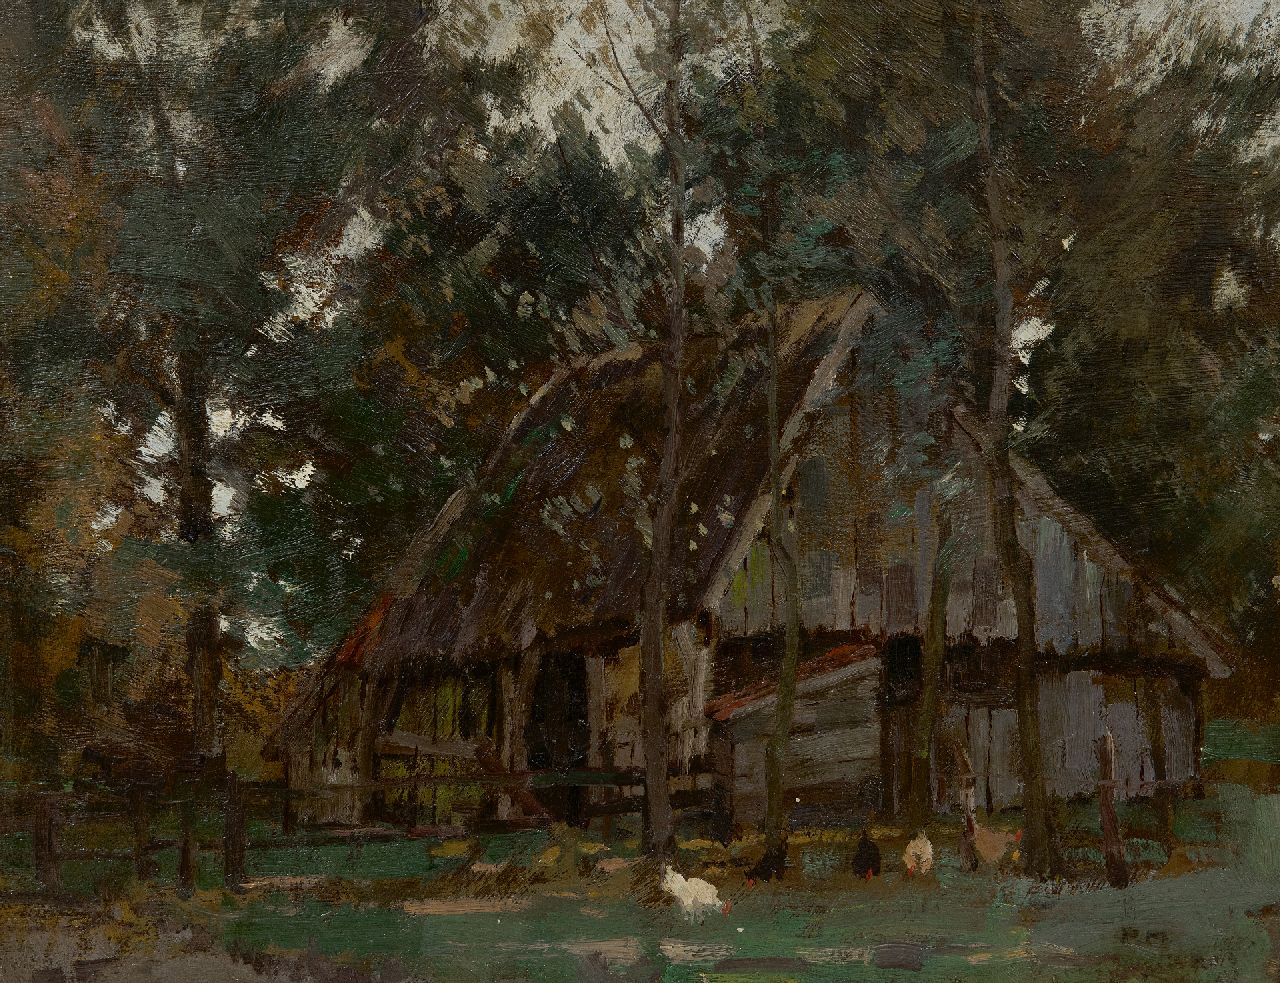 Meiners P.  | Pieter 'Piet' Meiners | Paintings offered for sale | Barn in the woods, oil on canvas 41.0 x 31.0 cm, signed l.r. with initials